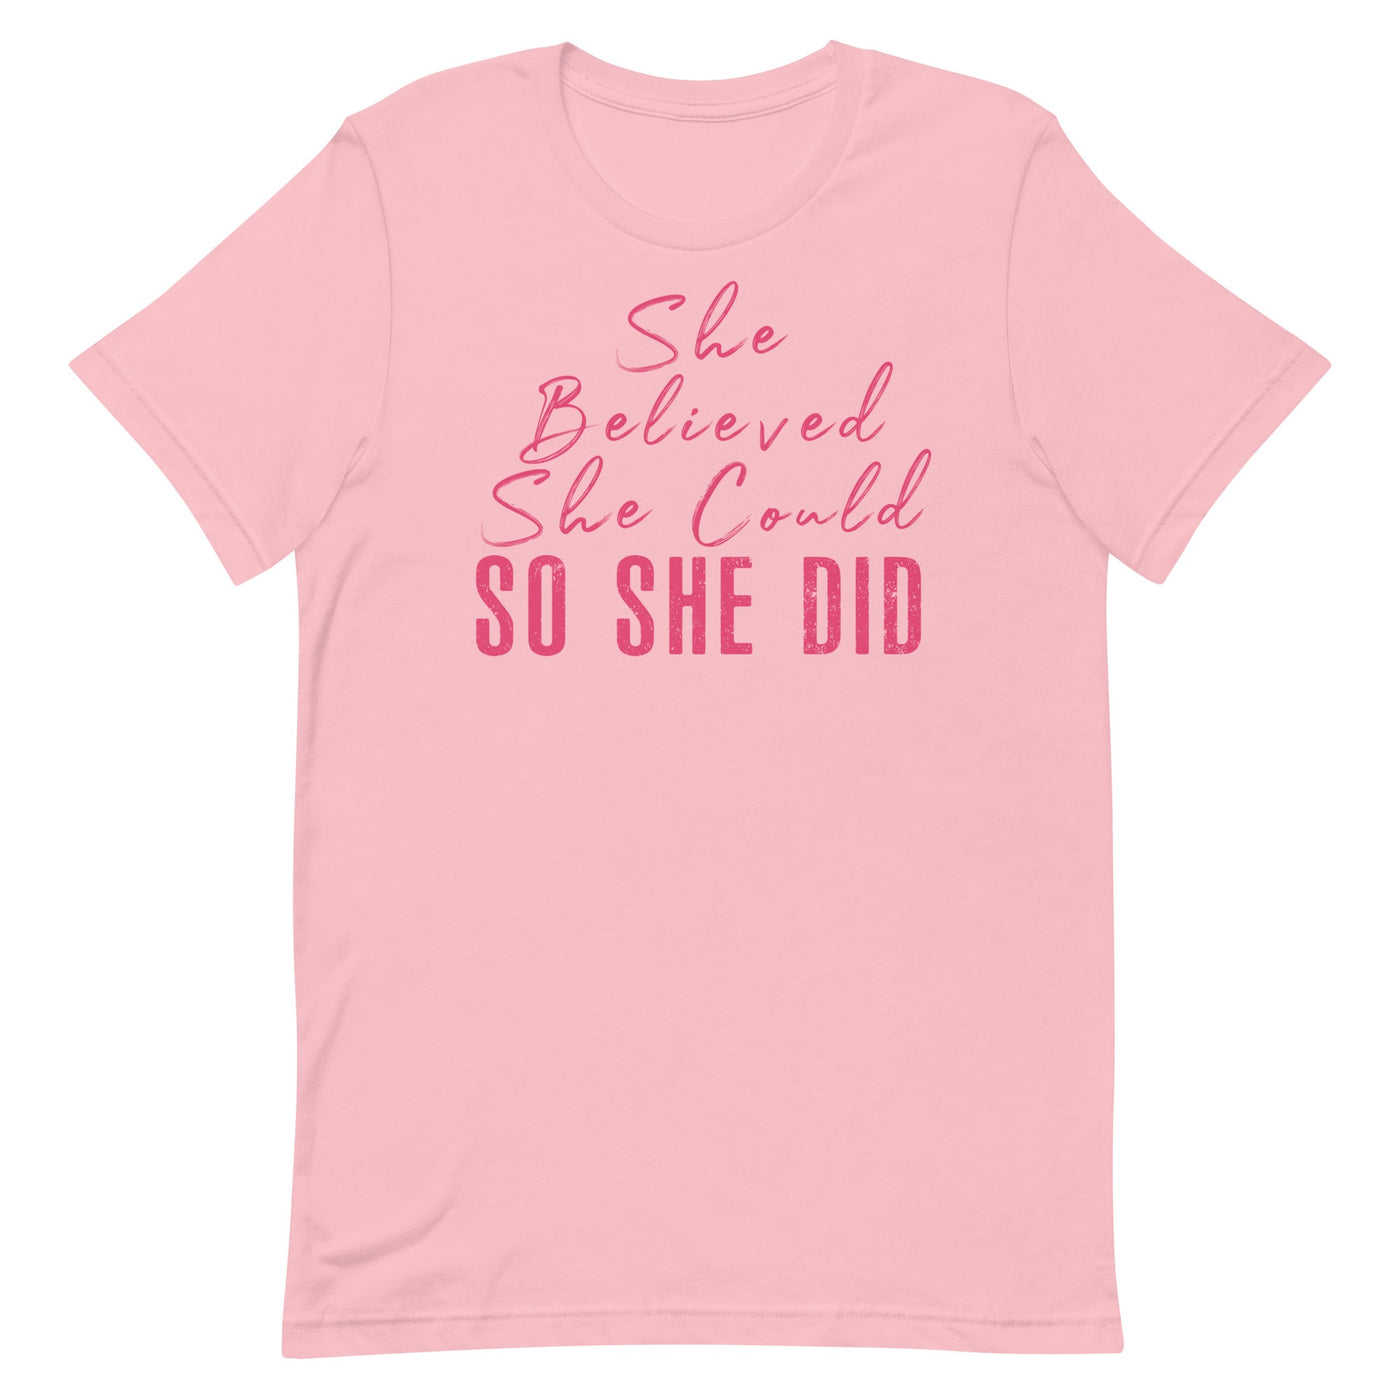 SHE BELIEVED SHE COULD SO SHE DID - PINK FONT Pink S 